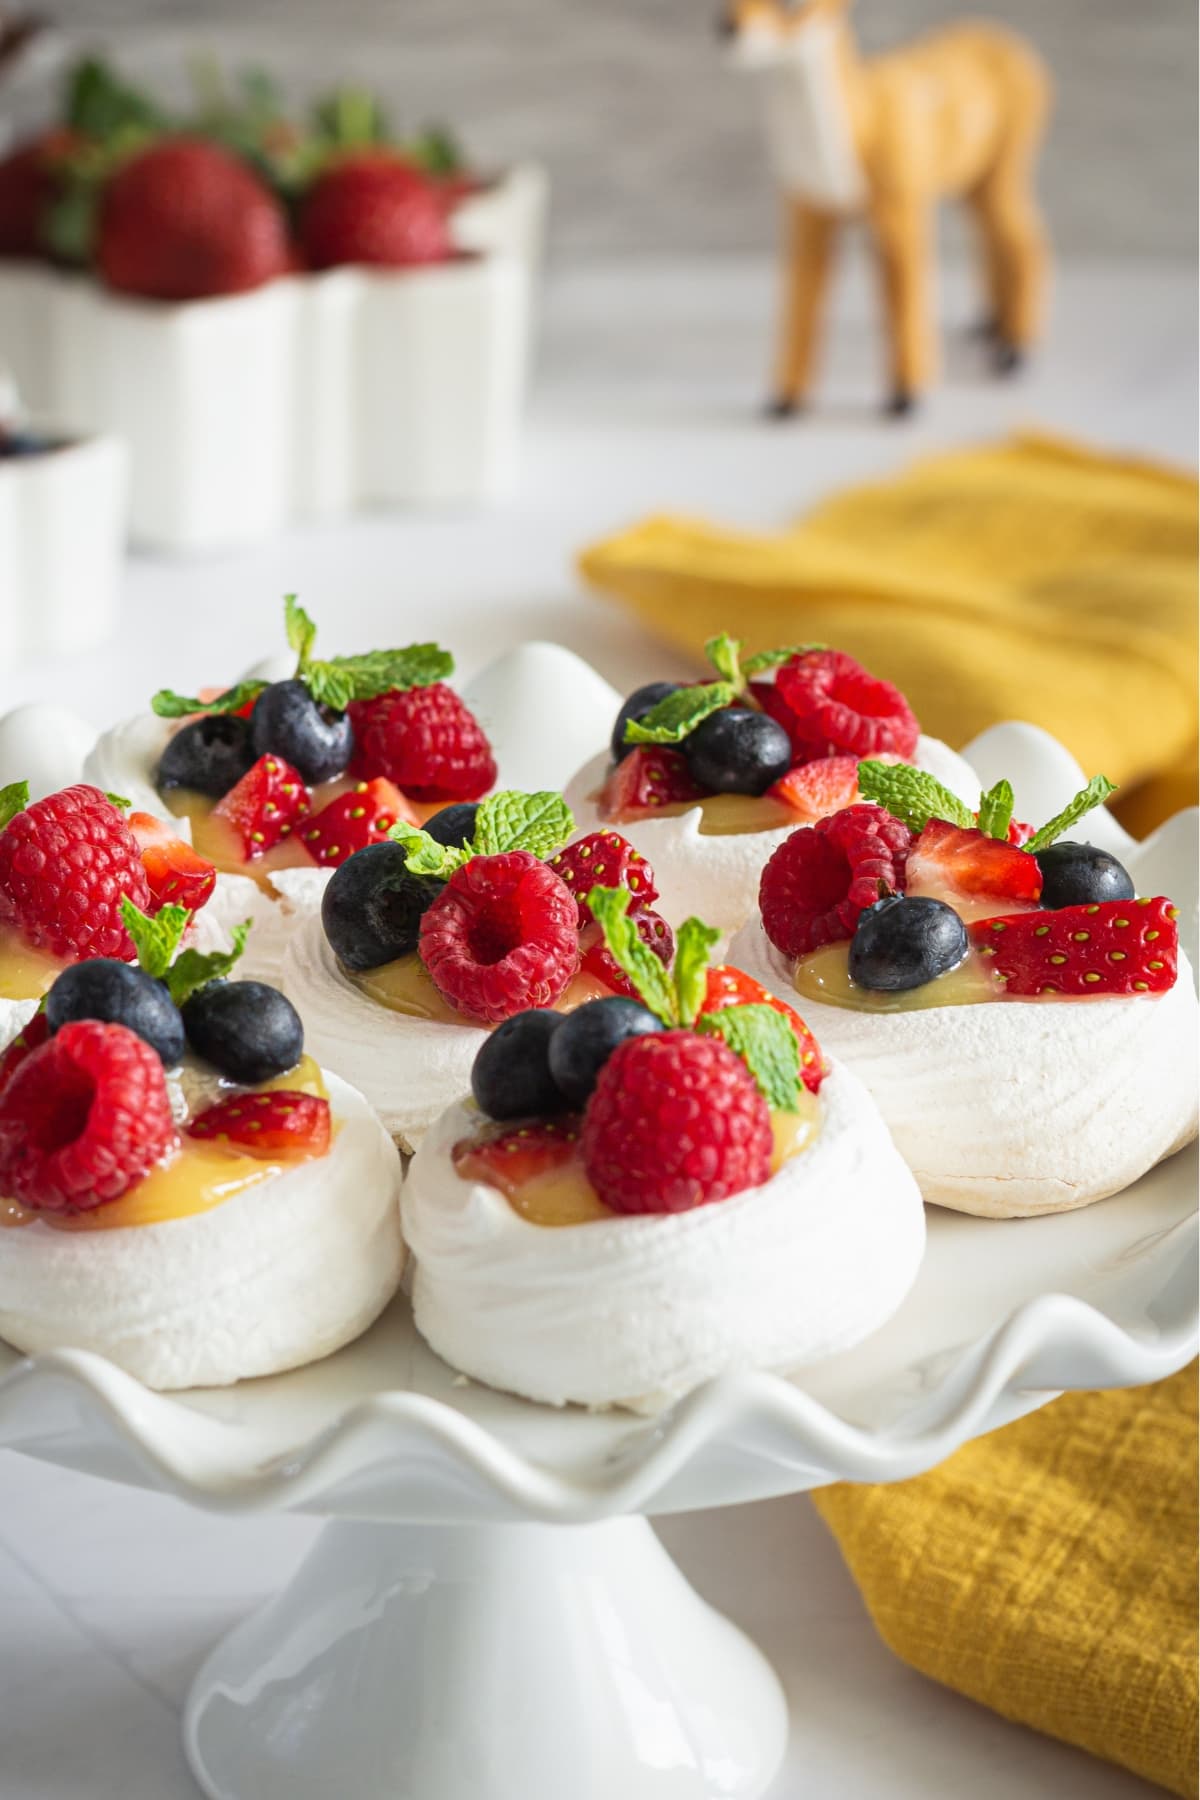 Pavlova topped with custard and berries served on a cake tray.